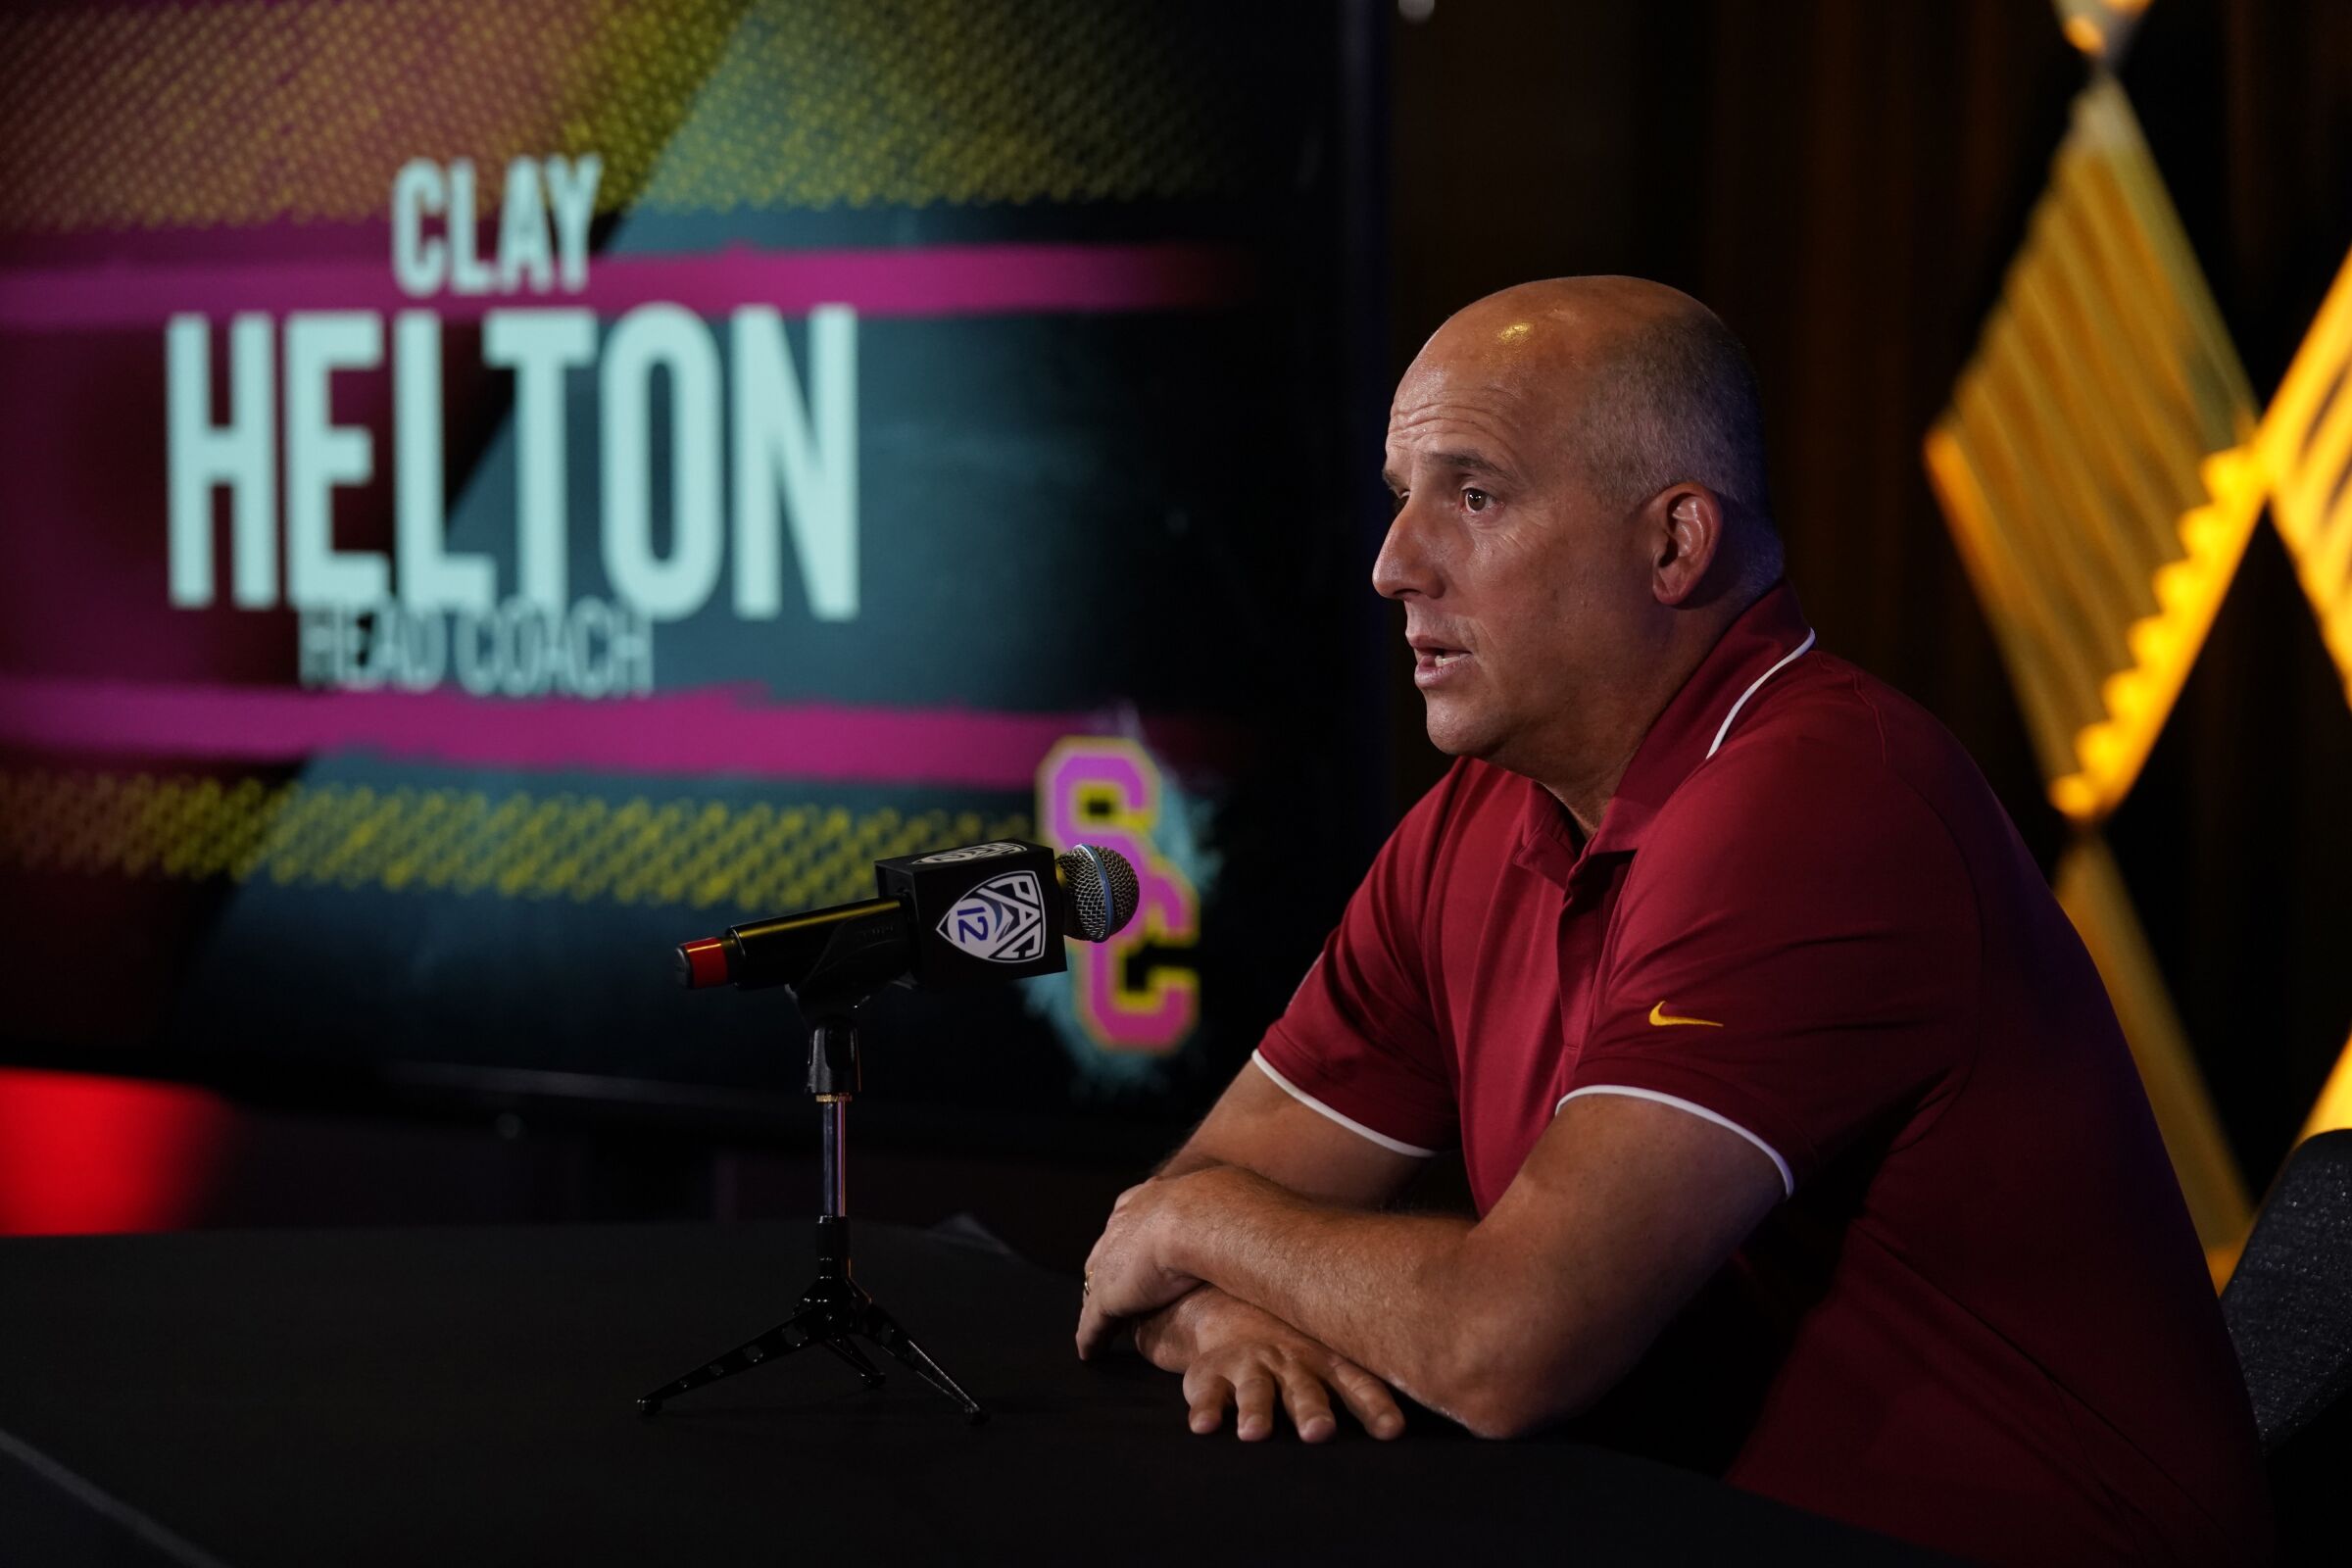  USC coach Clay Helton sits and speaks into a microphone during Pac-12 media day.